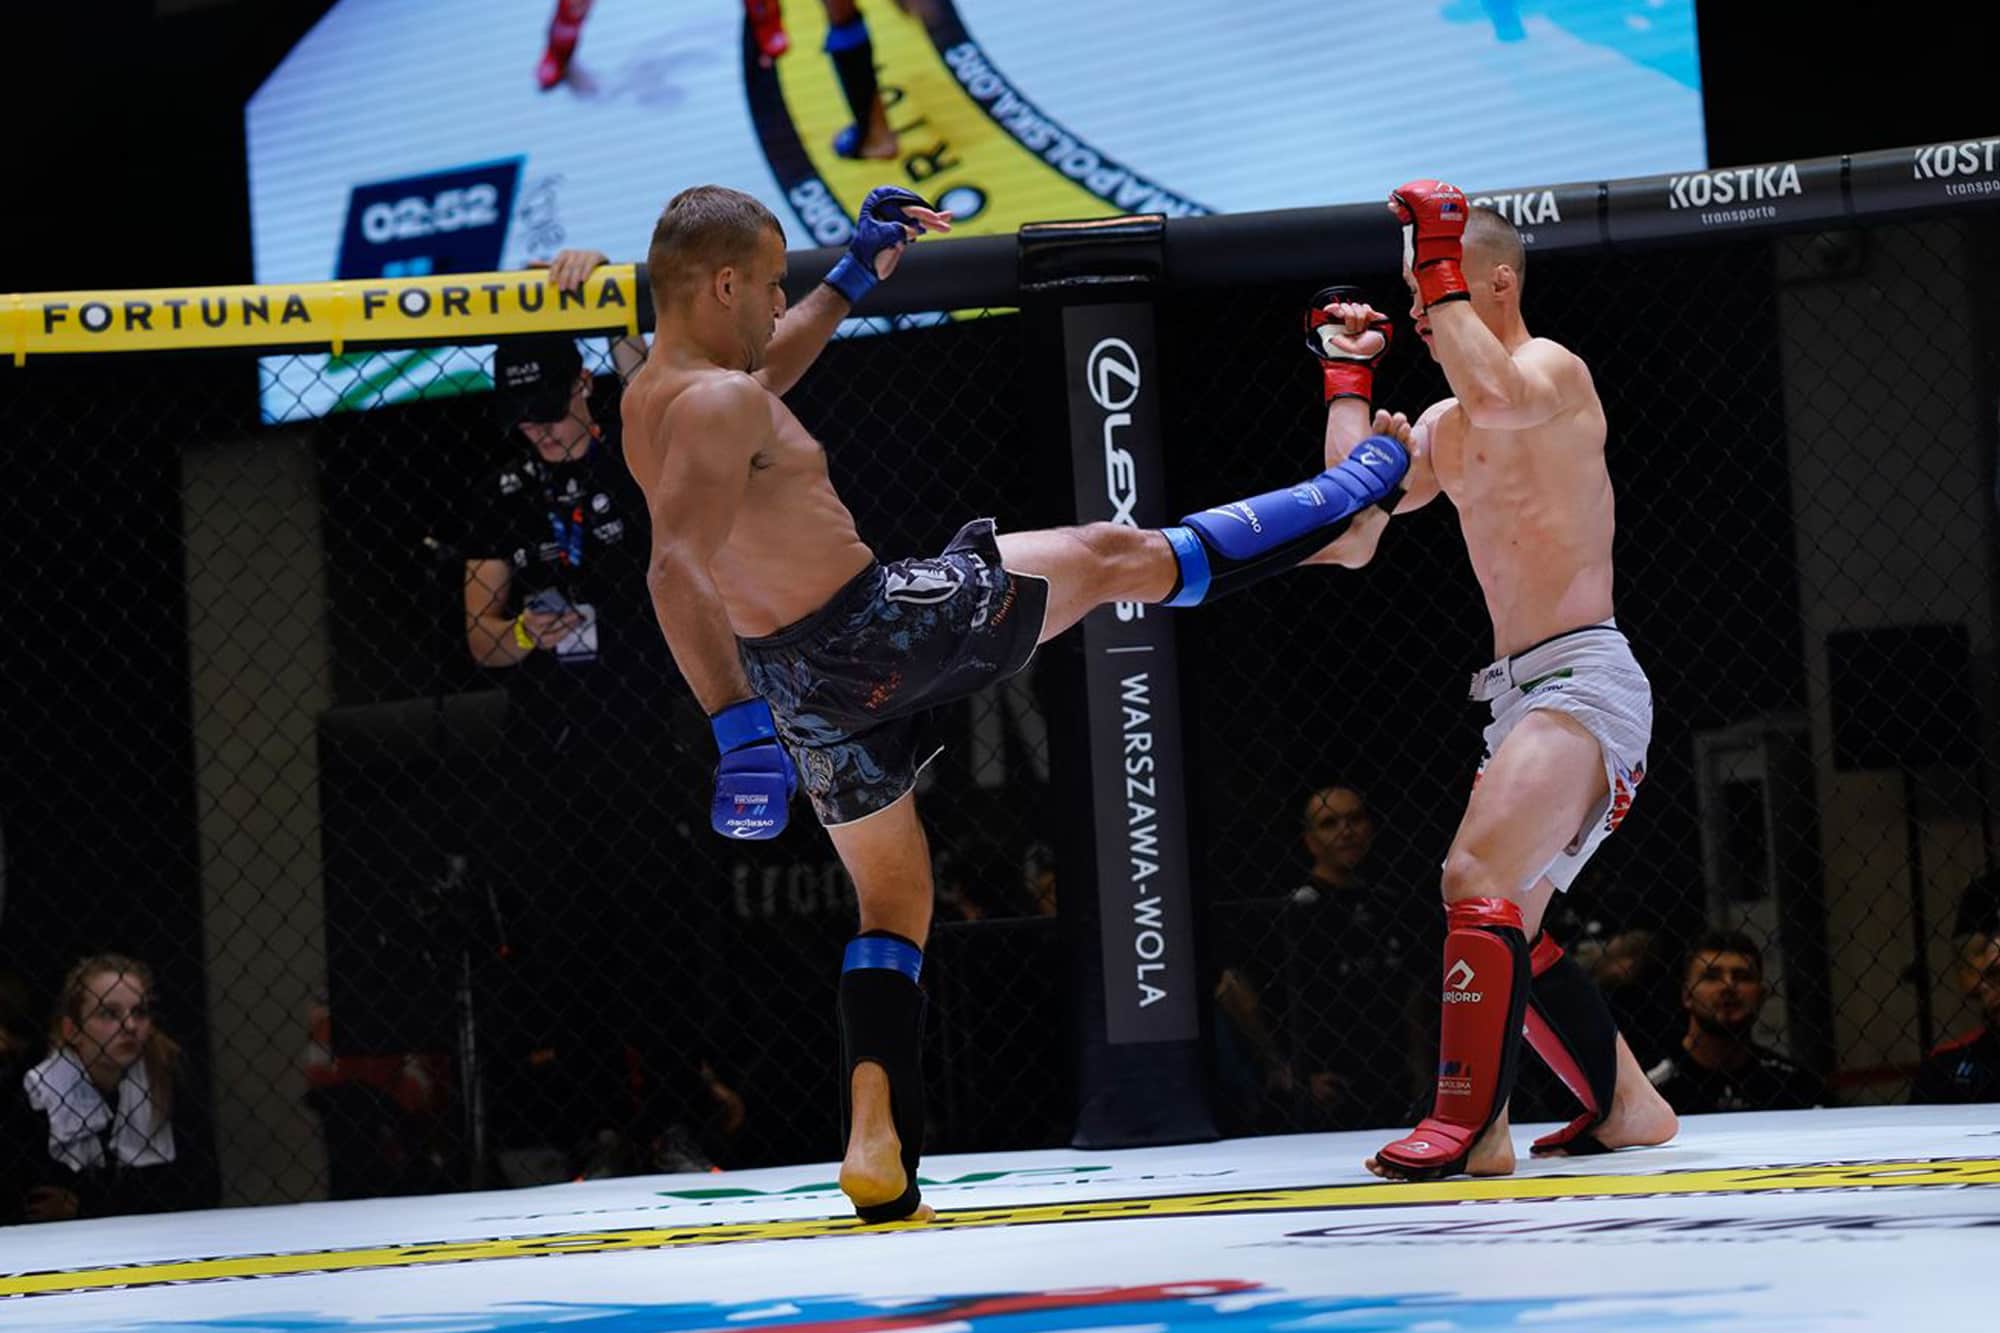 Final MMA Polska Championships of 2022 Sees Record Number of Entrants